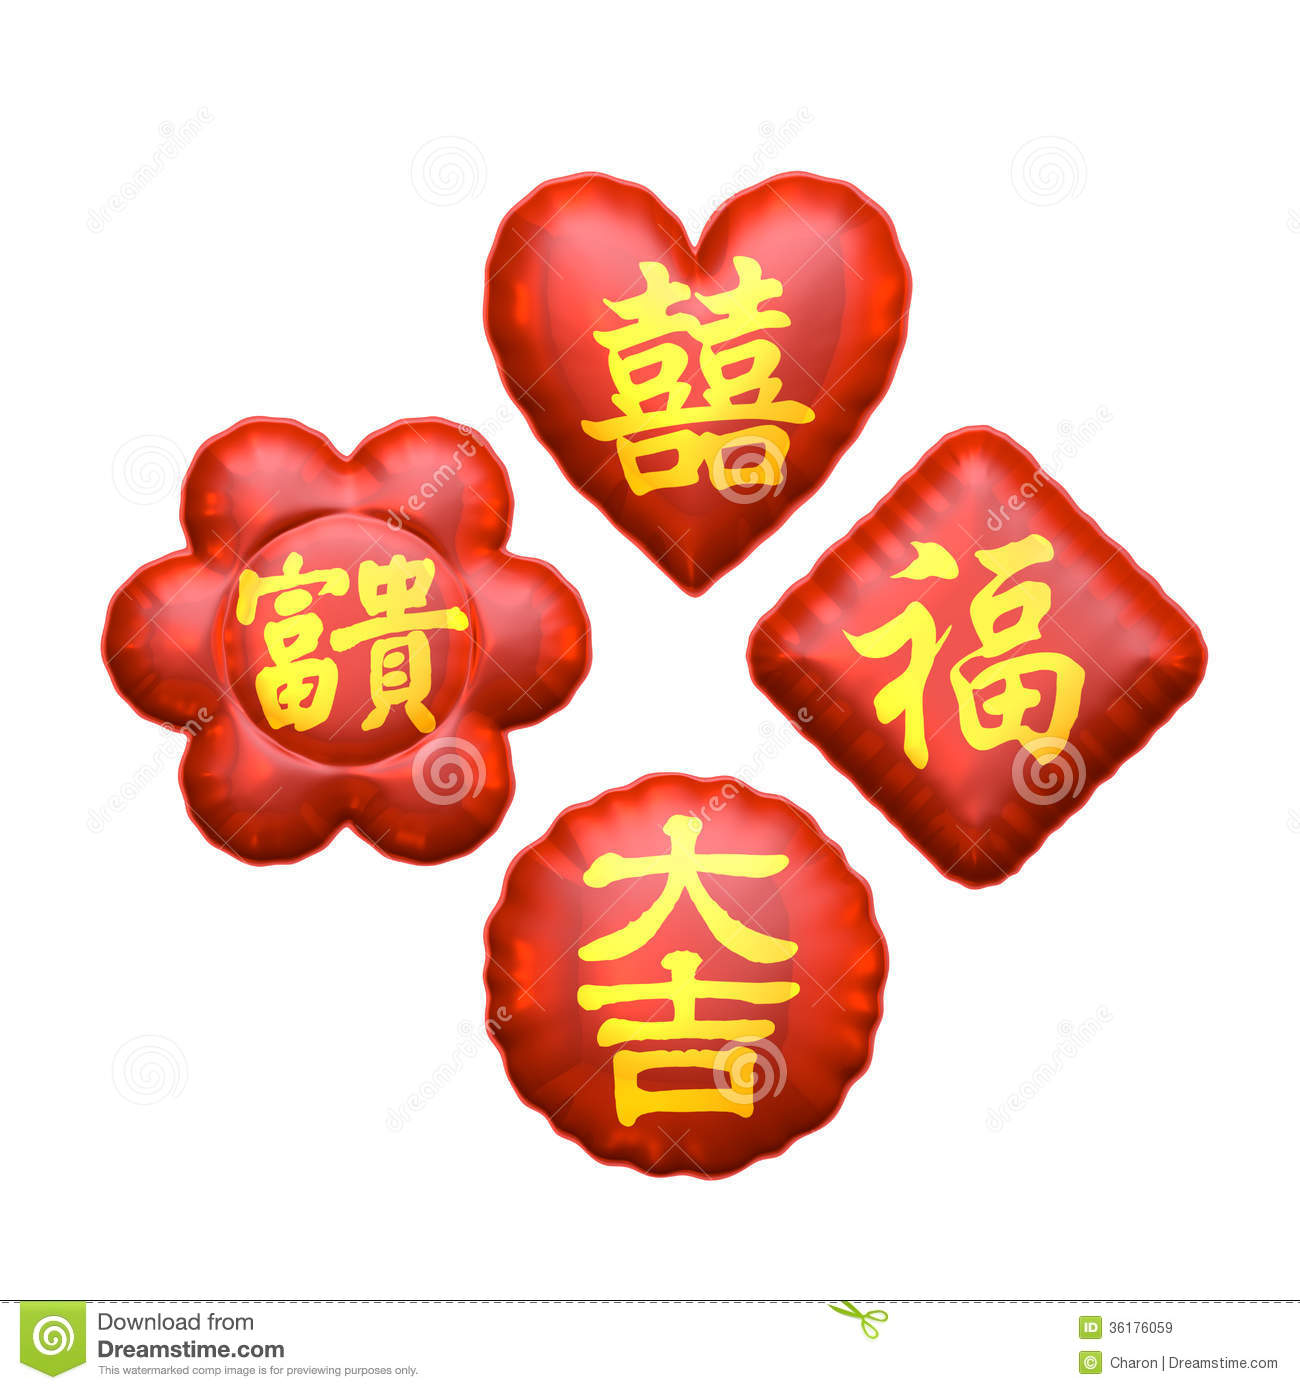 Asssorted Fortune Charms For Either Chinese Wedding Or Lunar New Year